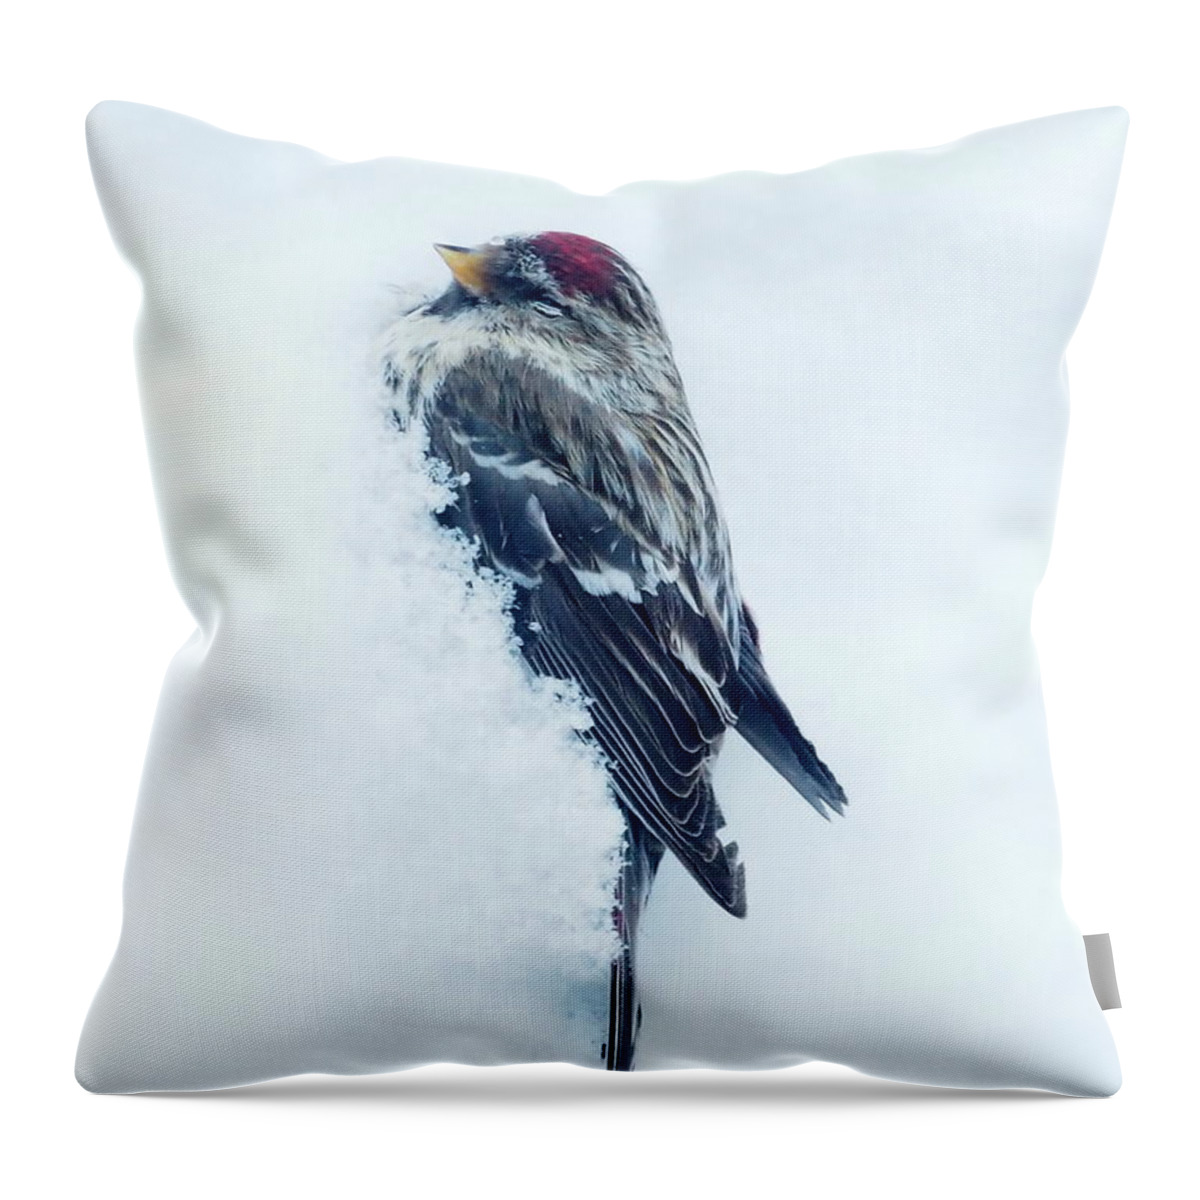  Throw Pillow featuring the photograph Requiem for a Redpoll by A K Dayton